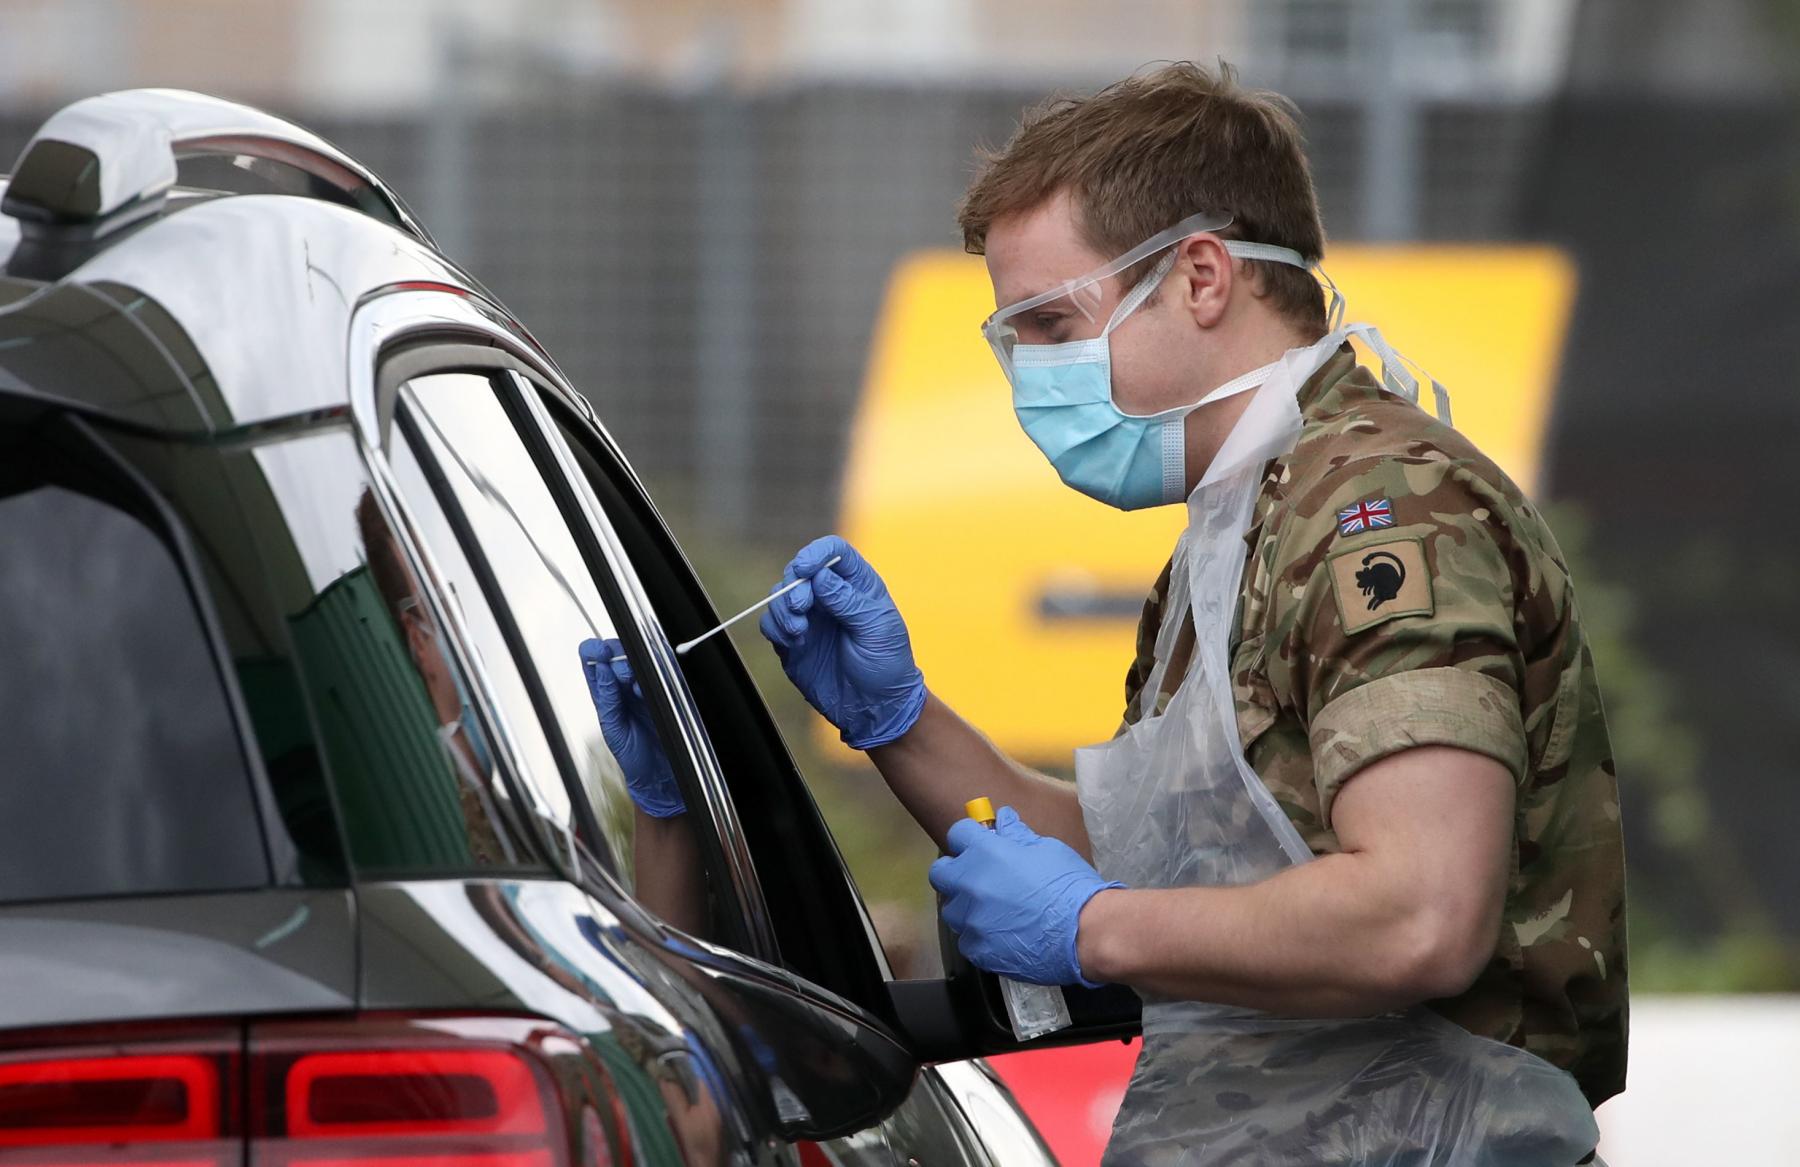 TESTING TIME: A member of the armed services carries out a swab to detect Covid-19.